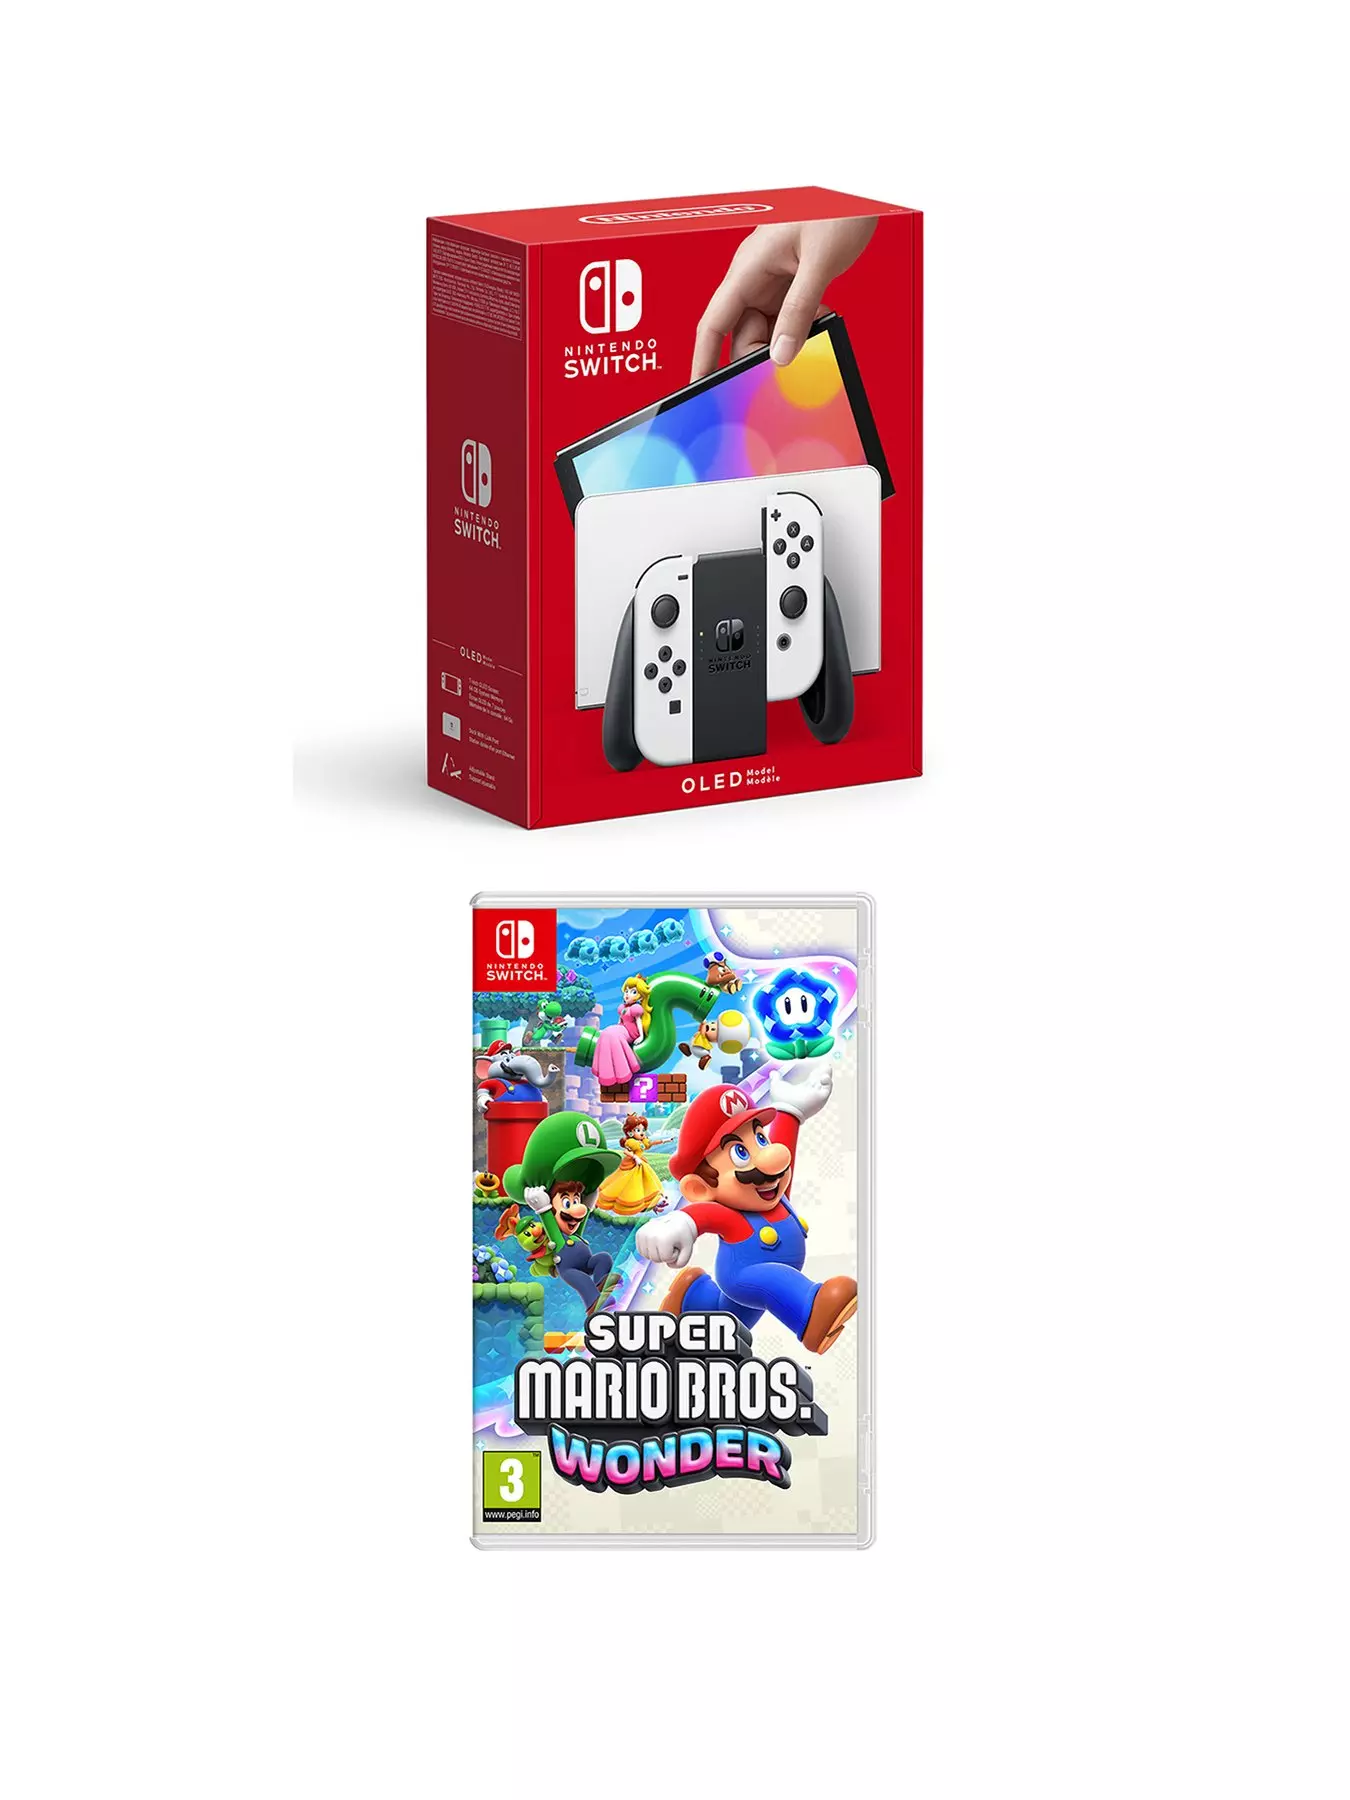 Nintendo Switch OLED White with Animal Crossing New Horizons Game 